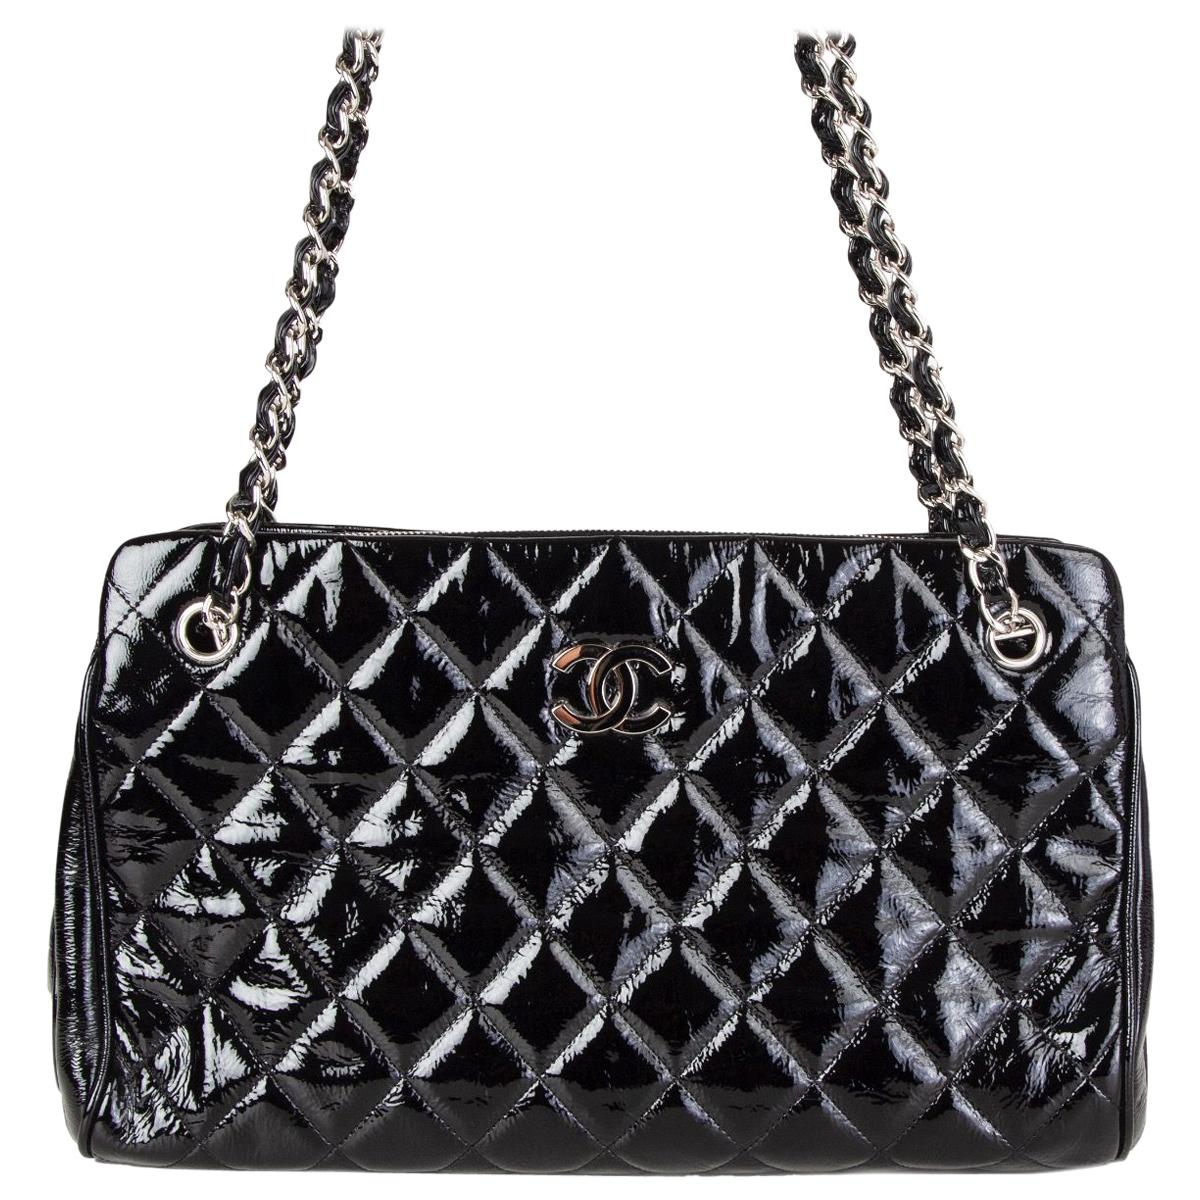 CHANEL black quilted patent leather CC ANGLE TOTE Shoulder Bag at